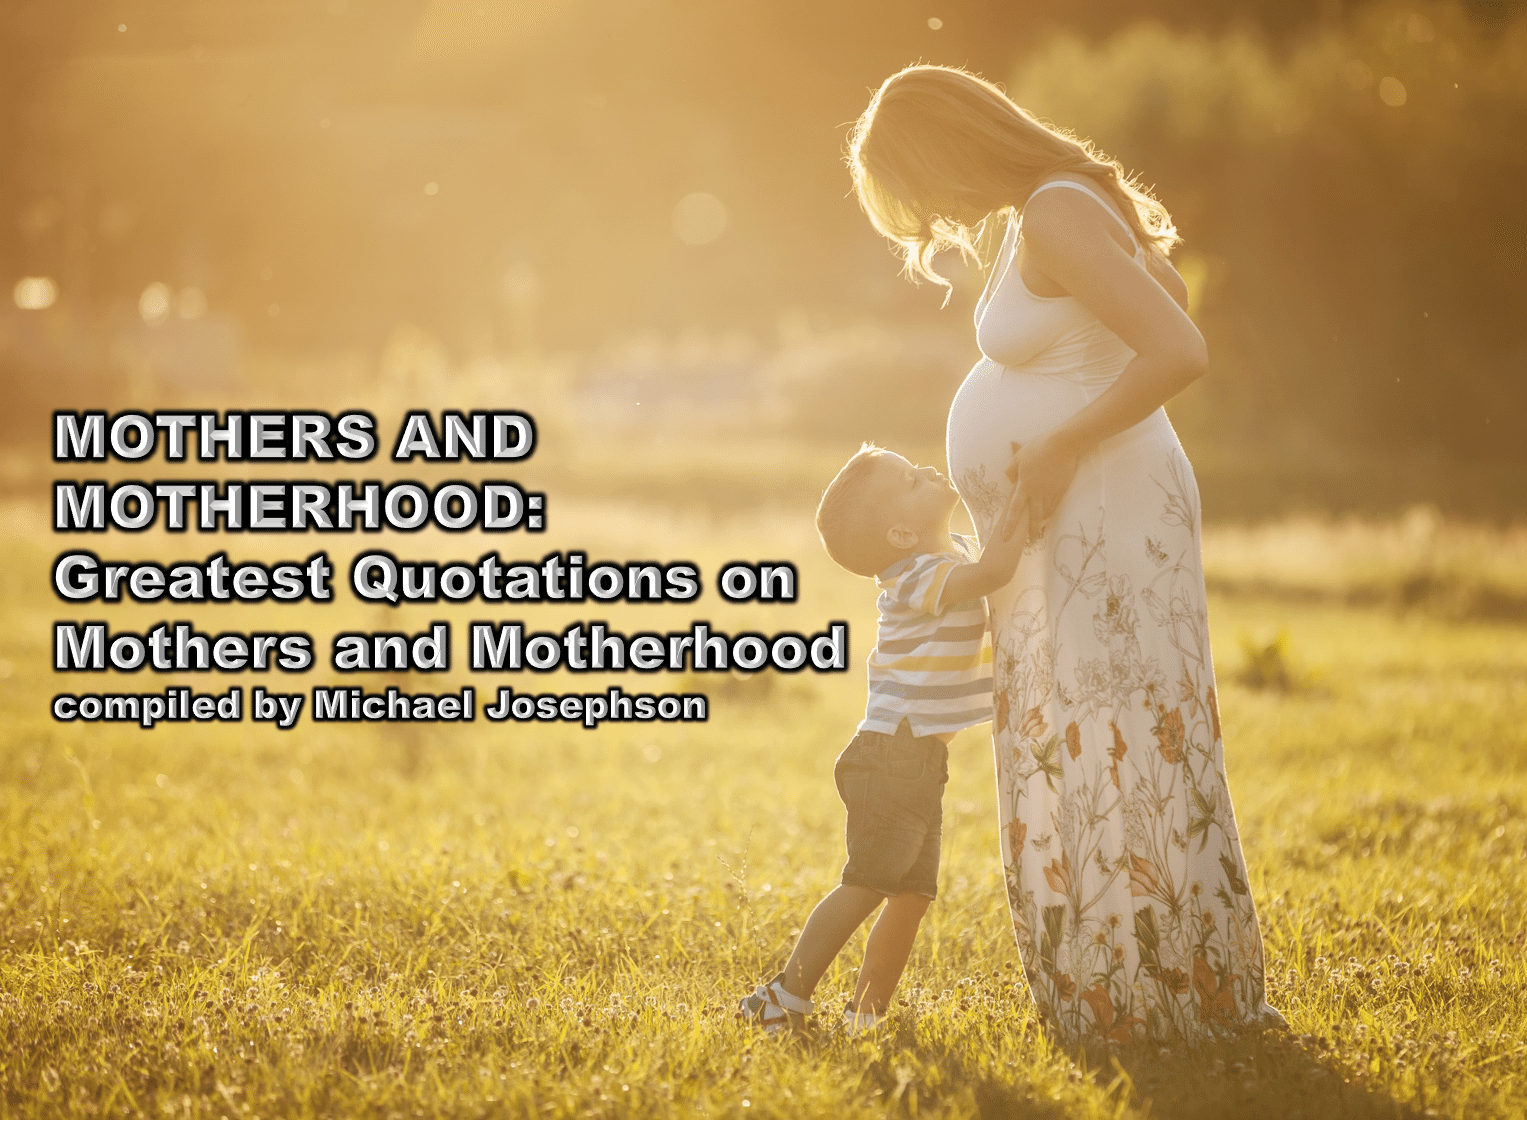 Greatest Quotations on Mothers and Motherhood – What Will Matter